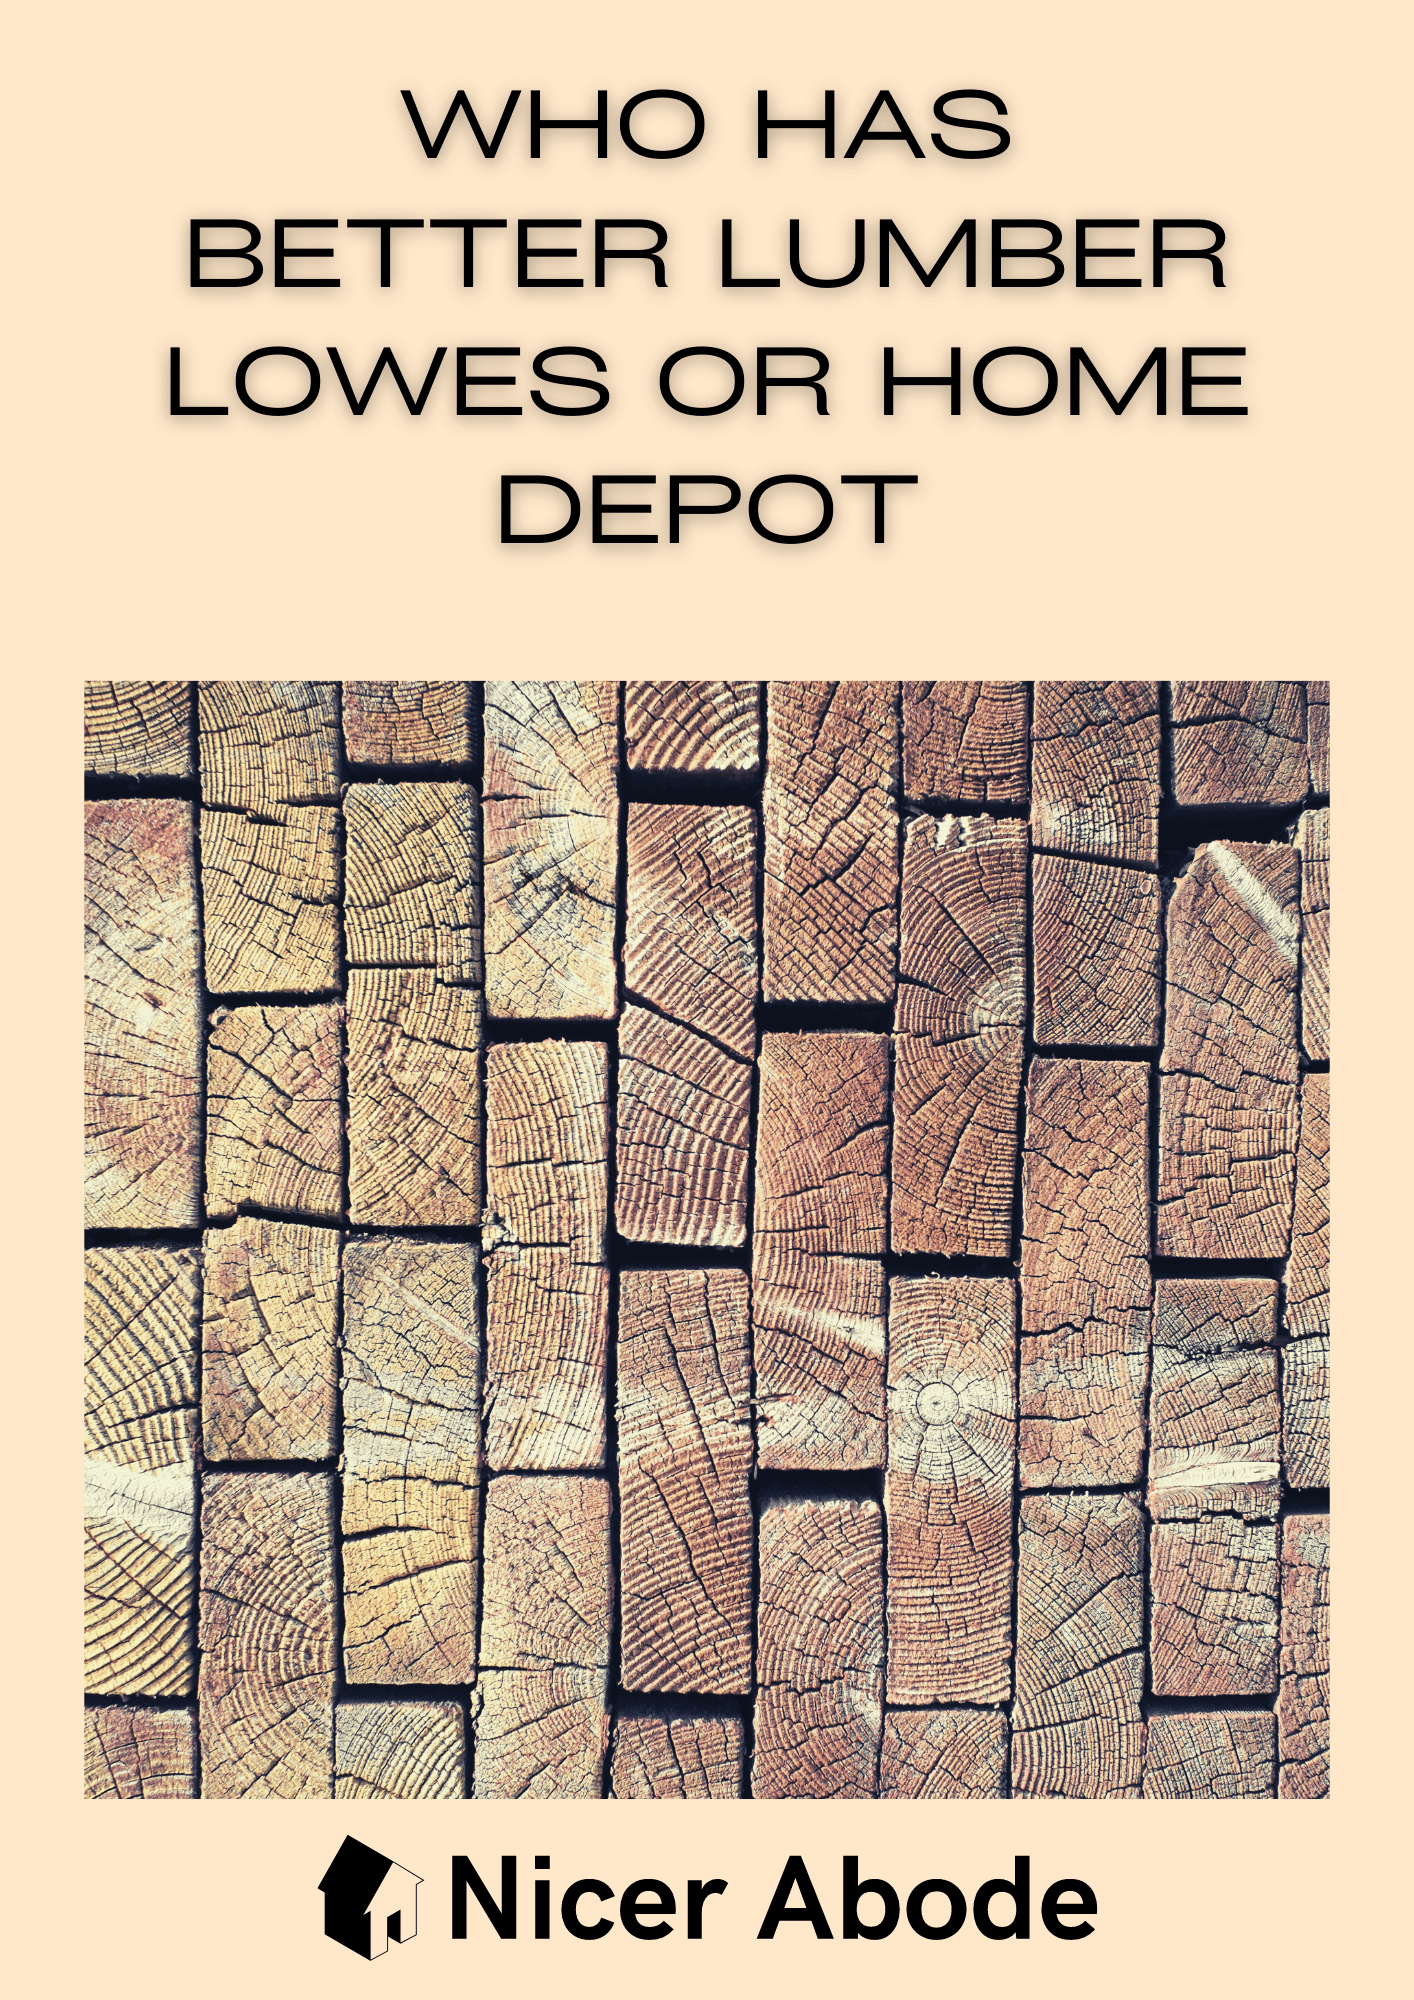 WHO-HAS-BETTER-LUMBER-LOWES-OR-HOME-DEPOT